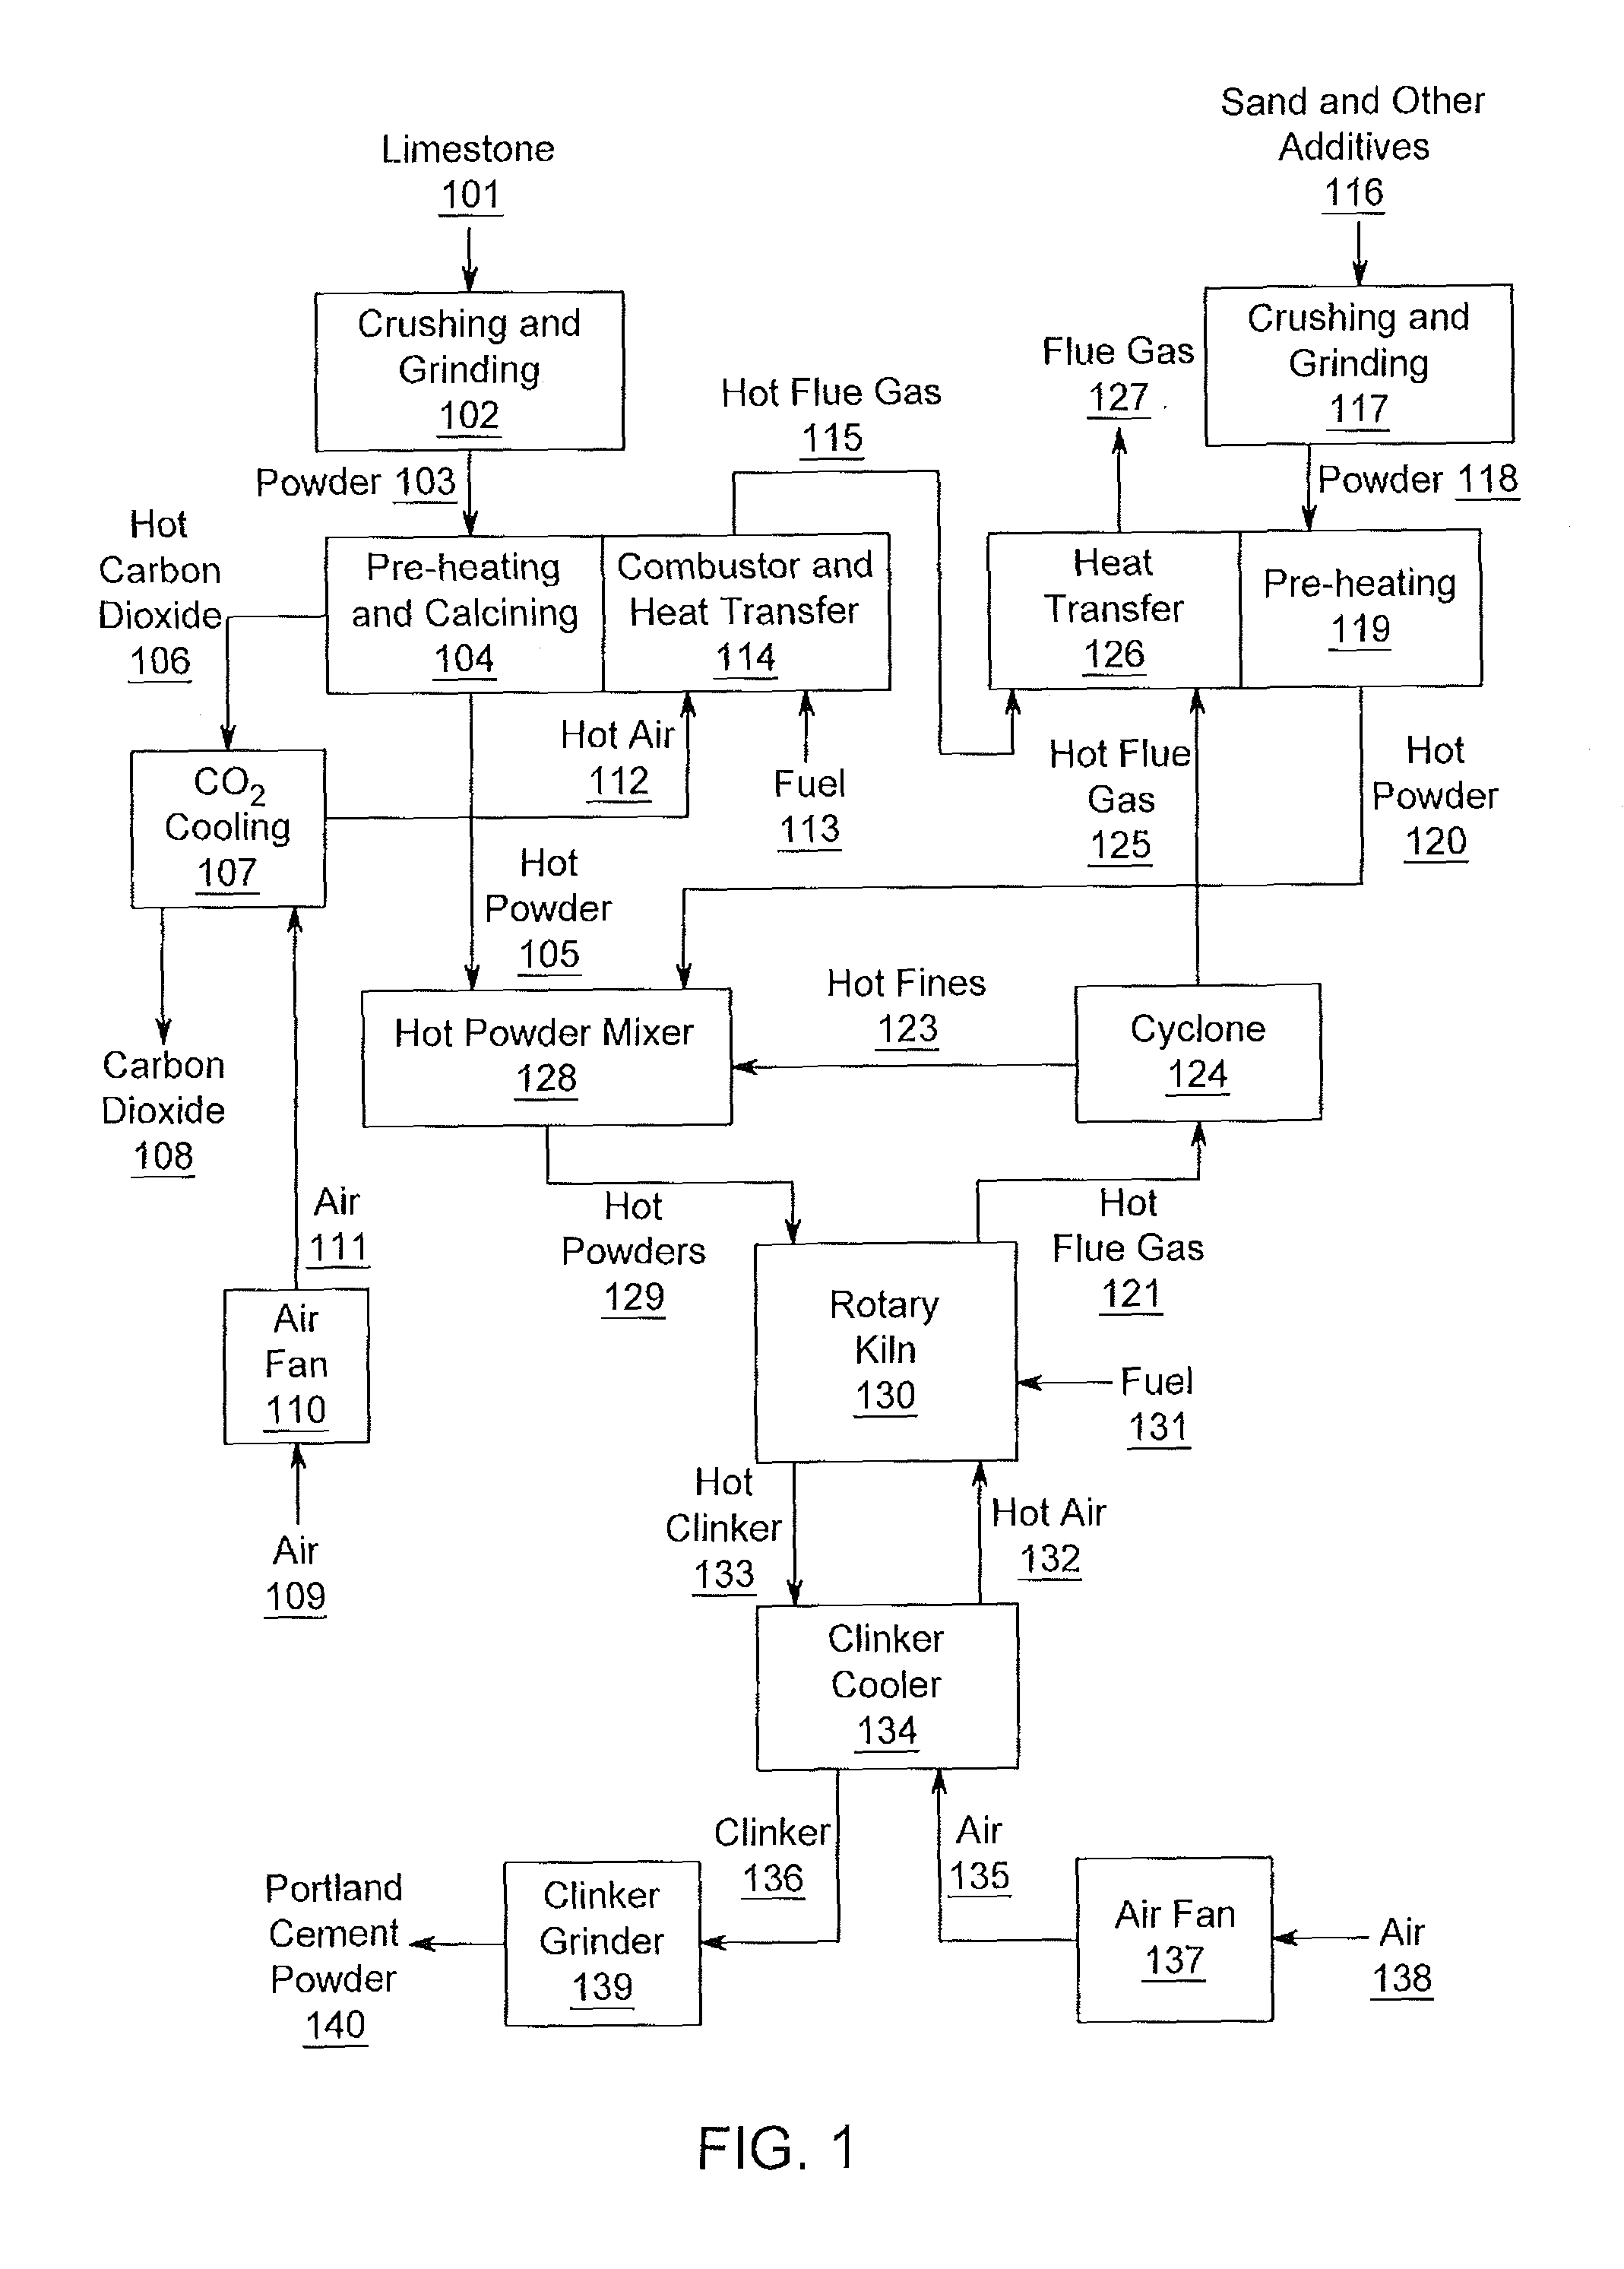 Process and Apparatus for Manufacture of Portland Cement